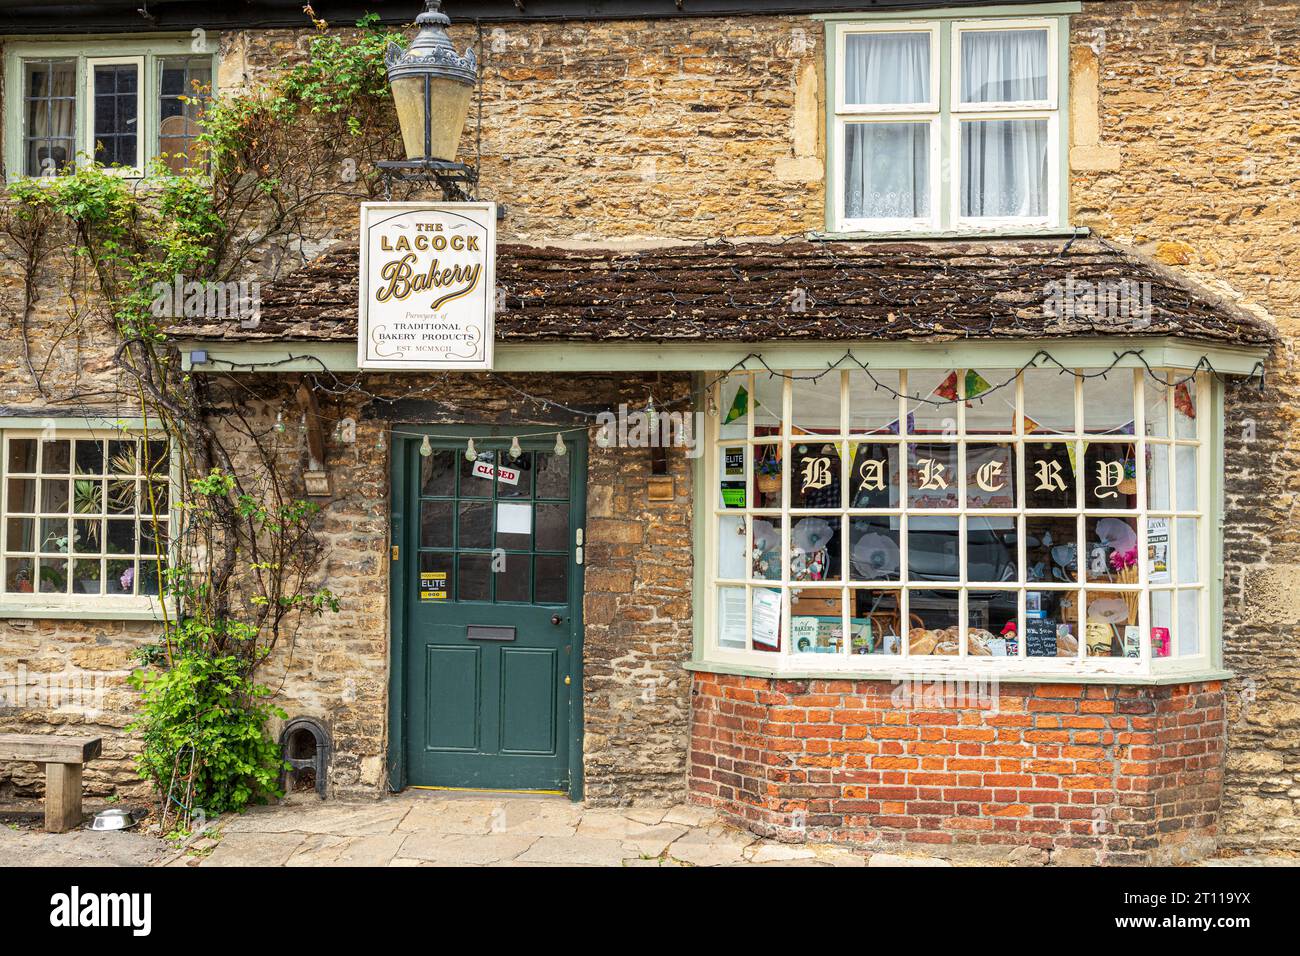 The Lacock Bakery, a traditional bakers shop in the village of Lacock, Wiltshire, England UK Stock Photo